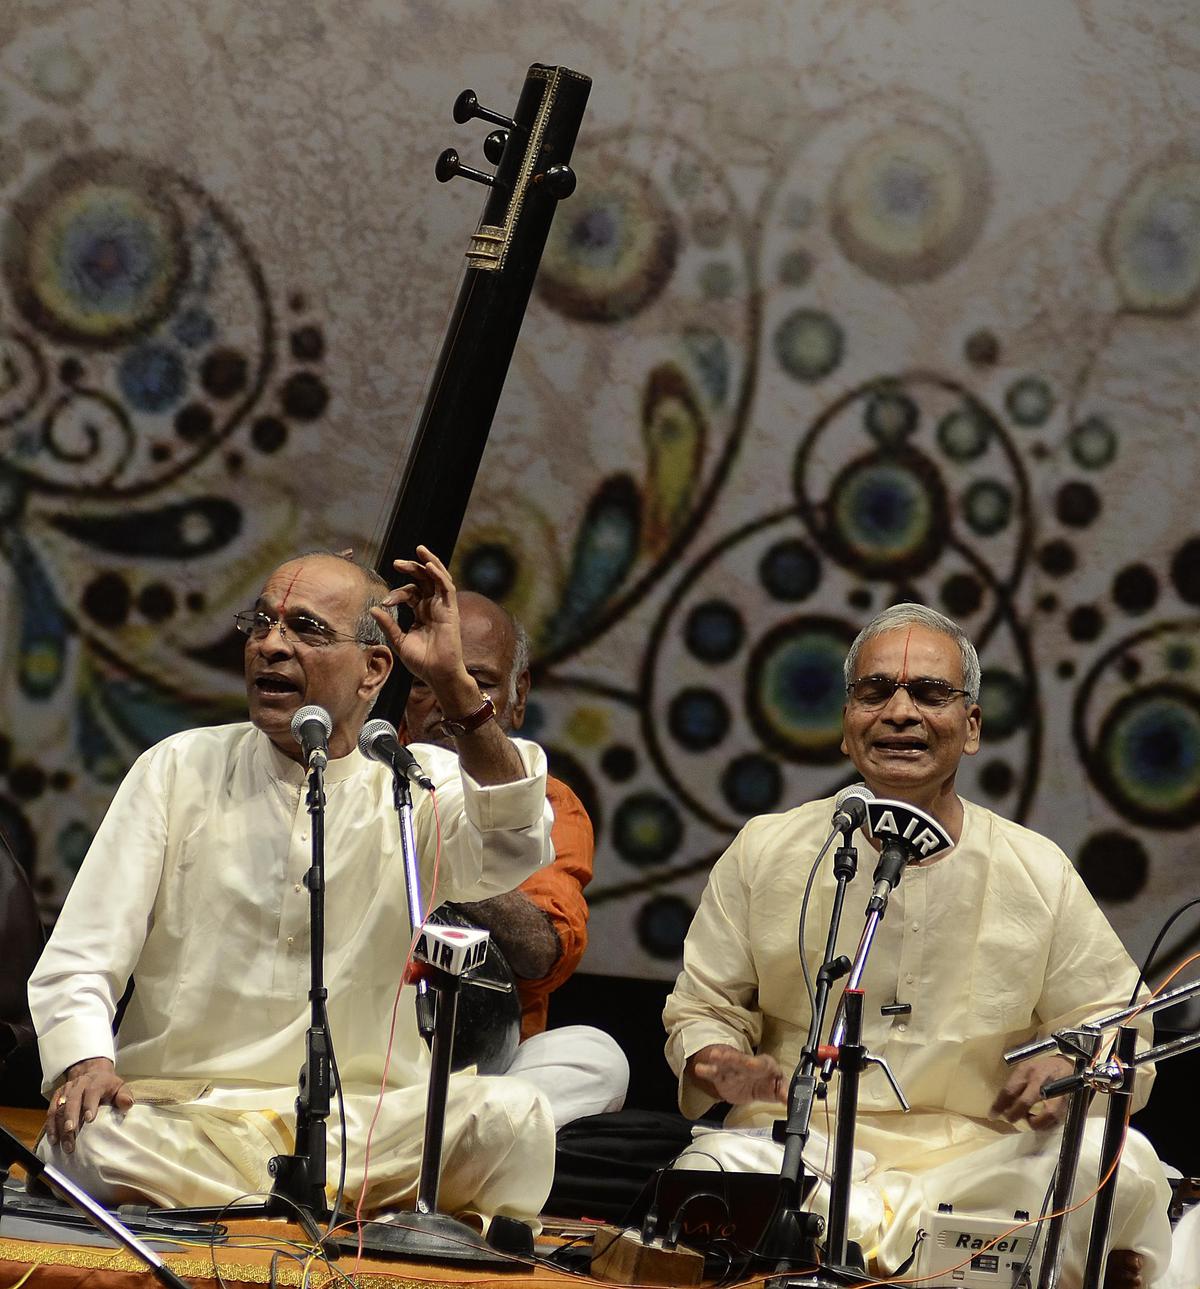 Chennai, 16/12/2012: Hyderabad Brothers, D. Raghavachari and D. Seshachari, performing vocal concert at The Music Academy, 86th Annual Conference and Concerts, in Chennai.
Photo: R. Shivaji Rao